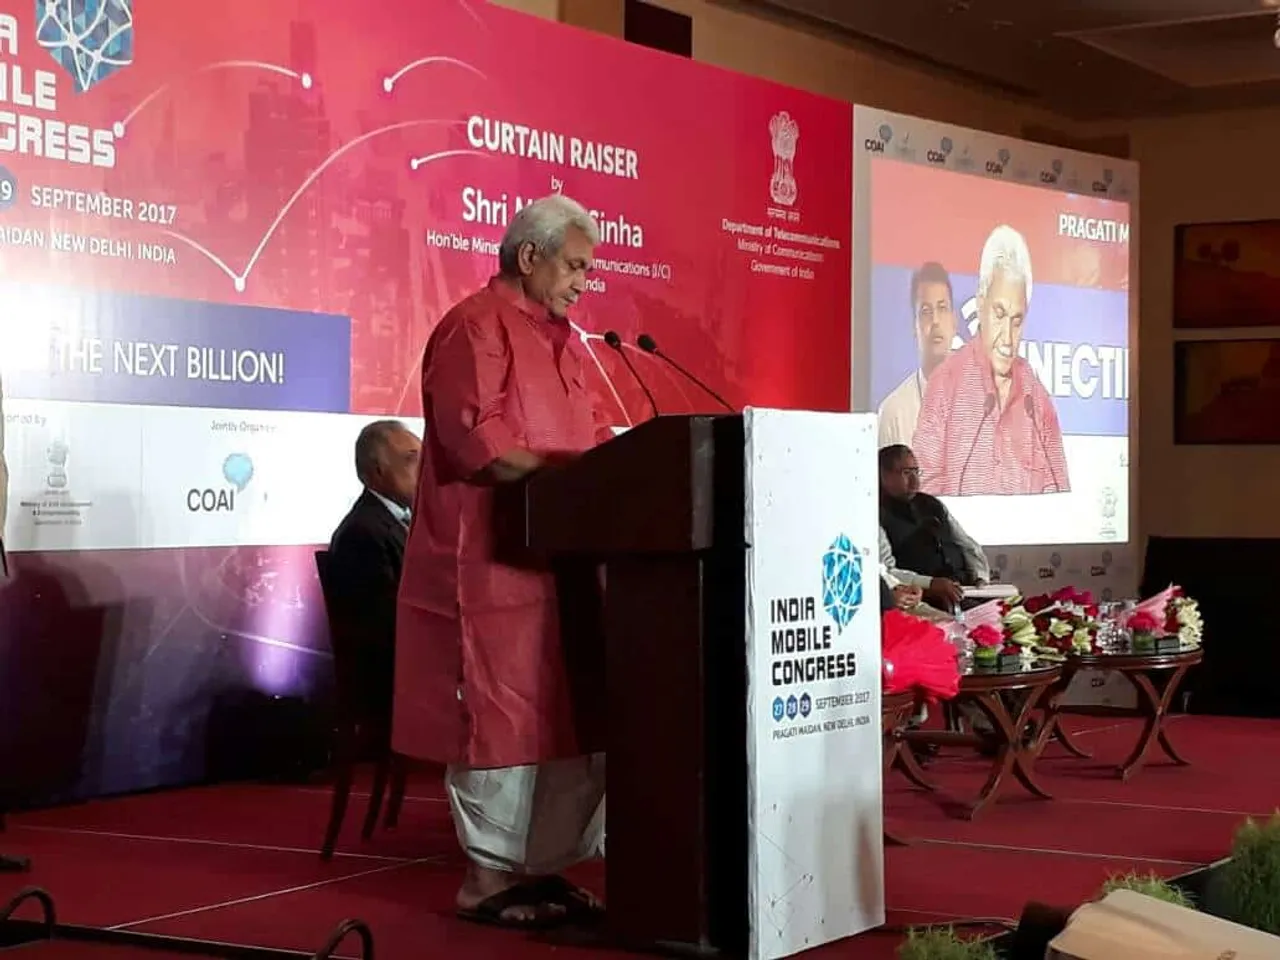 India Mobile Congress will be biggest event of telecom industry: Manoj Sinha